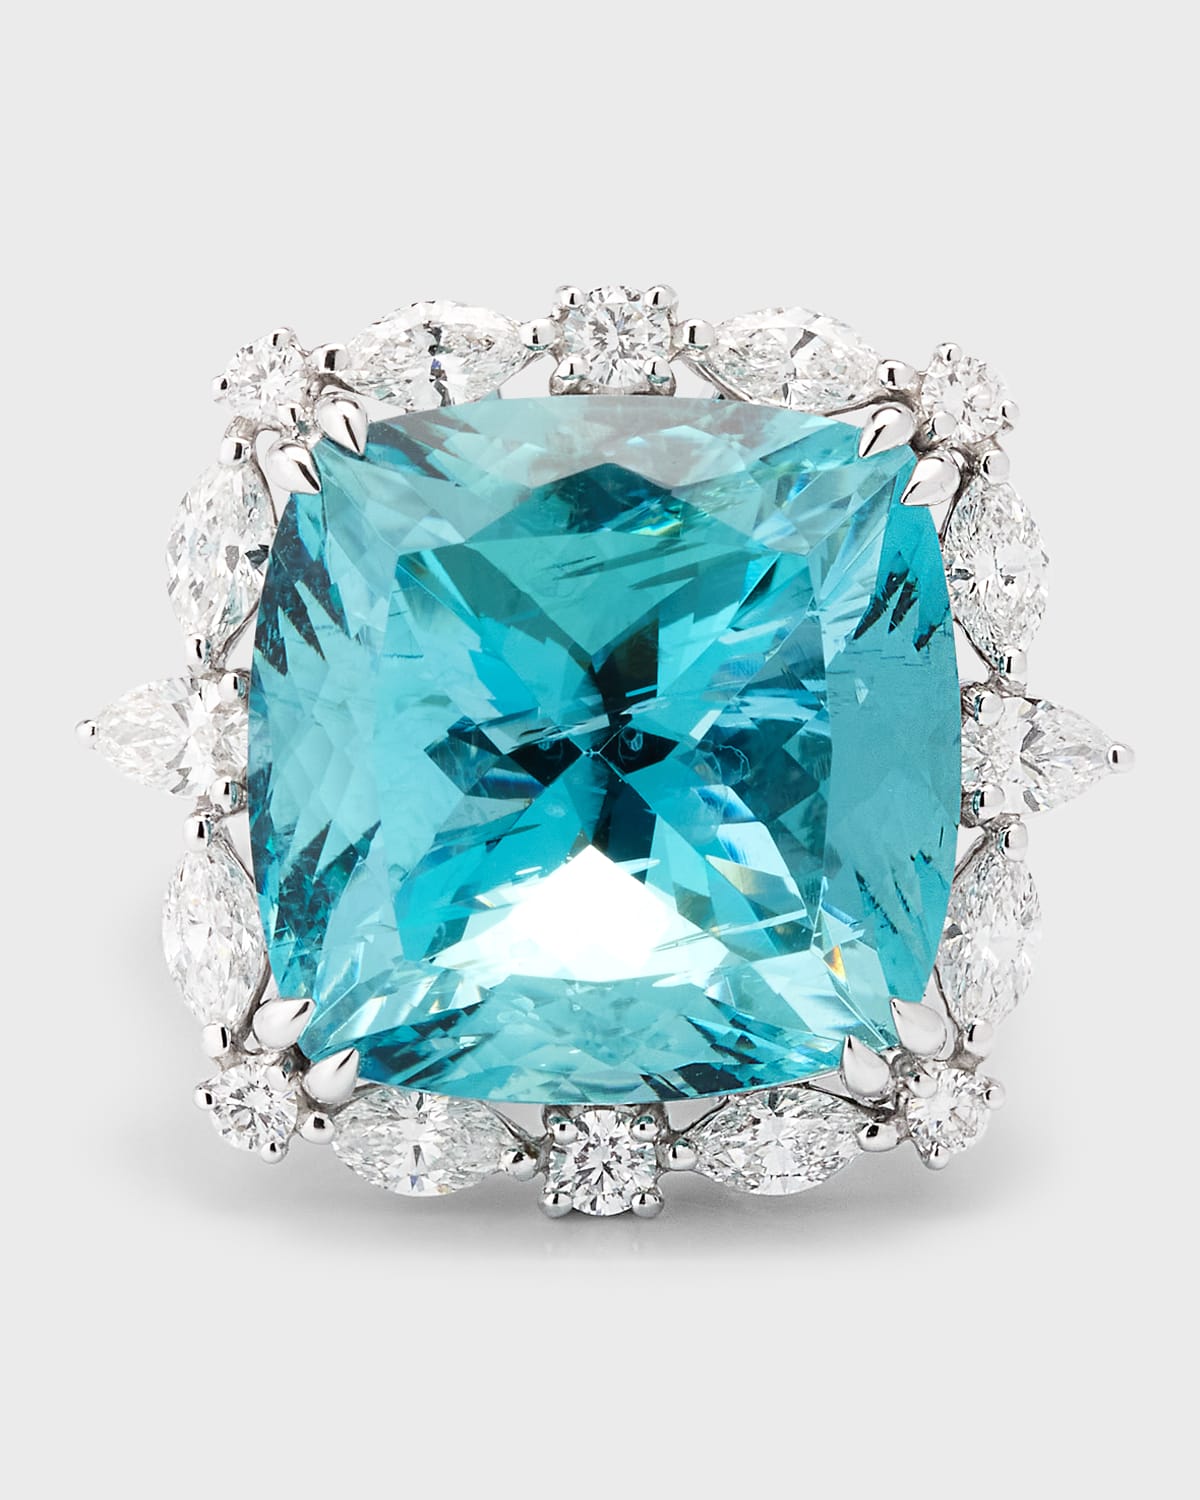 18K White Gold Aquamarine Solitaire Ring with Diamonds, Size 7